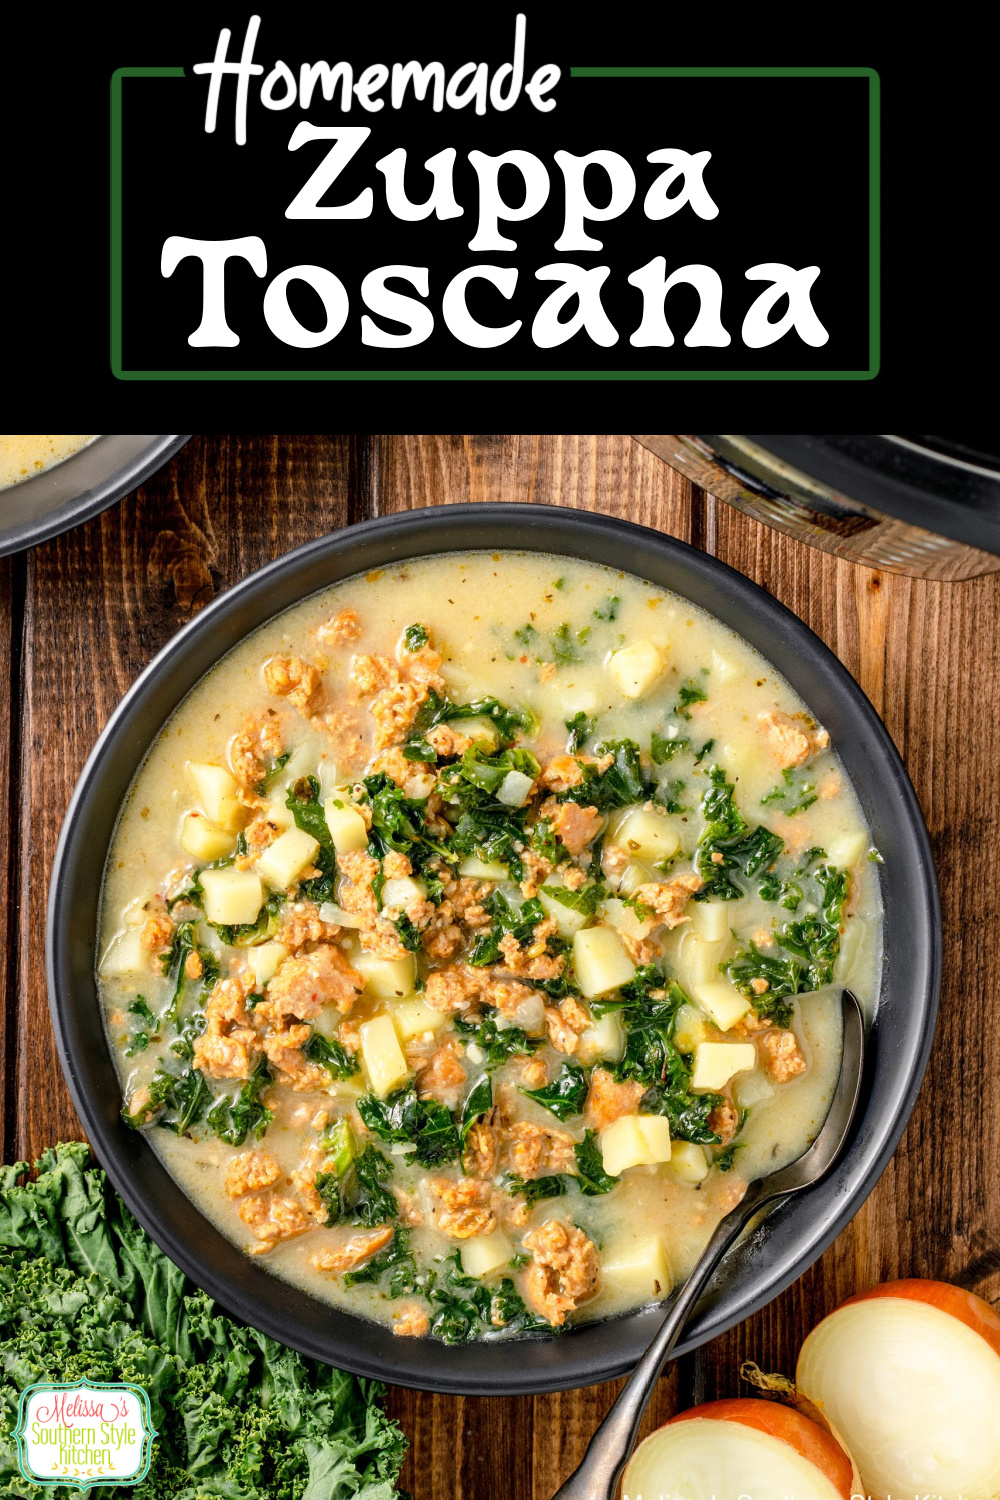 This better than copycat recipe for Zuppa Toscana will make a delicious addition to your make at home soup menu #zuppatoscana #copycatrecipes #olivegarden #souprecipes #instantpotrecipes #instantpotzuppatoscana #italianrecipes